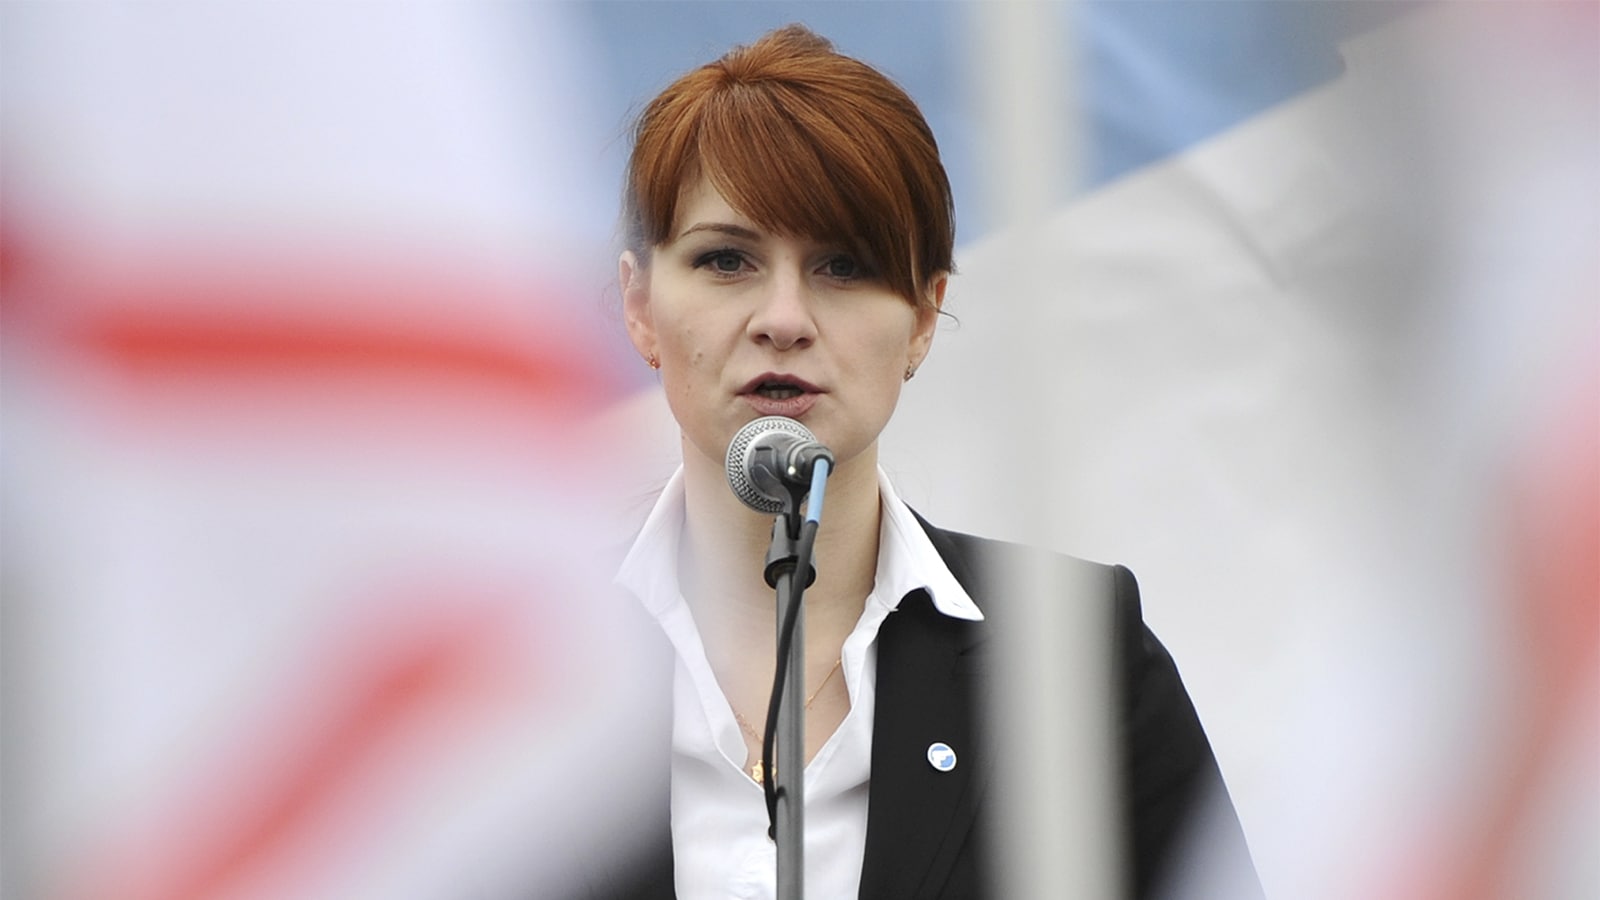 Mariia Butina, leader of a pro-gun organization in Russia, speaks to a crowd during a rally in support of legalizing the possession of handguns in Moscow, on April 21, 2013. Butina, a 29-year-old gun-rights activist, served as a covert Russian agent while living in Washington, gathering intelligence on American officials and political organizations and working to establish back-channel lines of communications for the Kremlin, federal prosecutors charged July 16, 2018. (AP Photo)